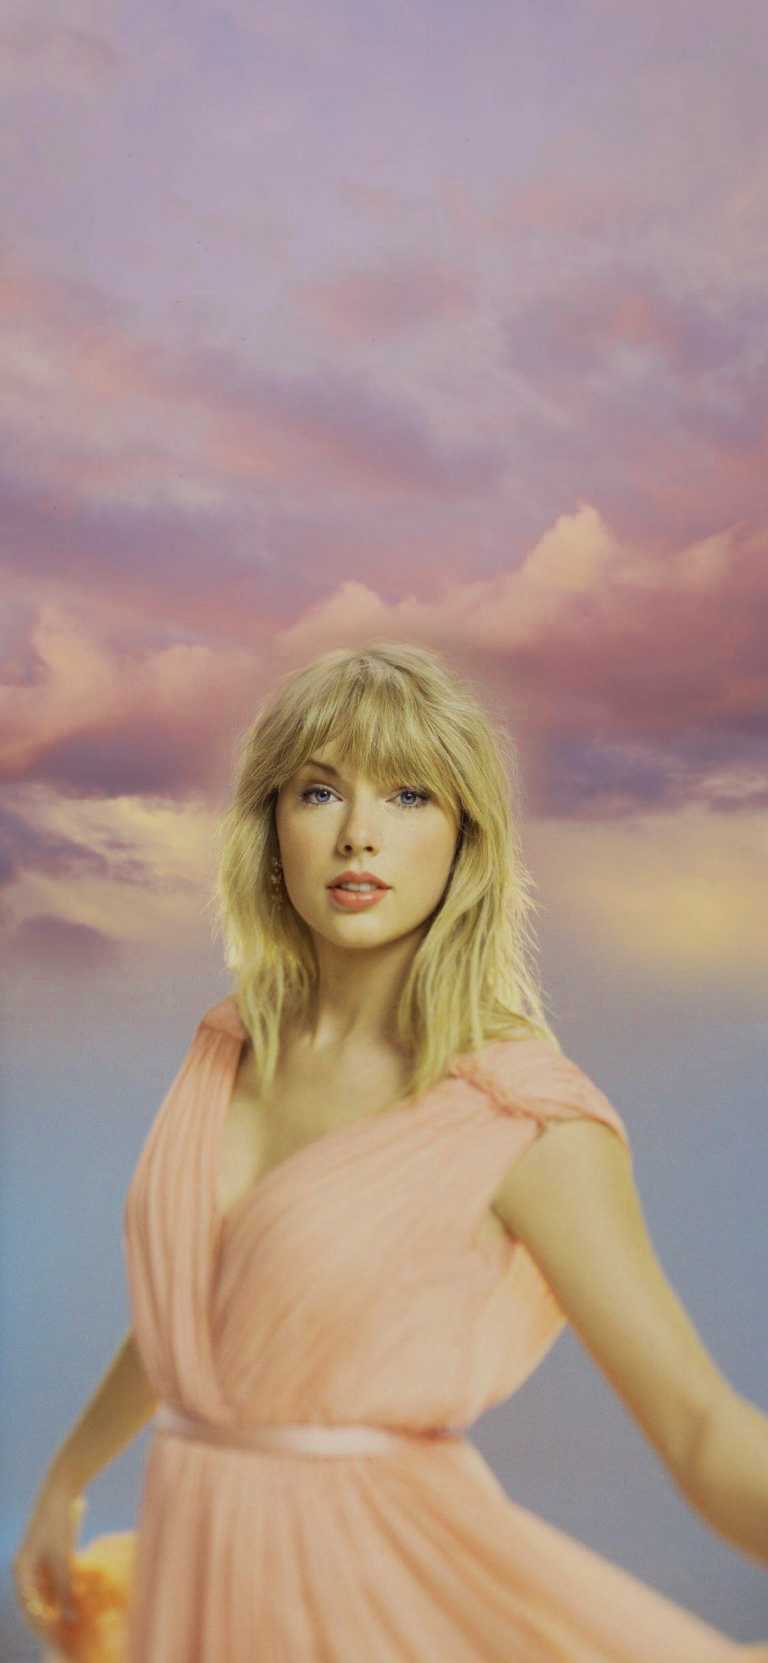 Taylor Swift in a pink dress standing in front of a pink sky - Taylor Swift